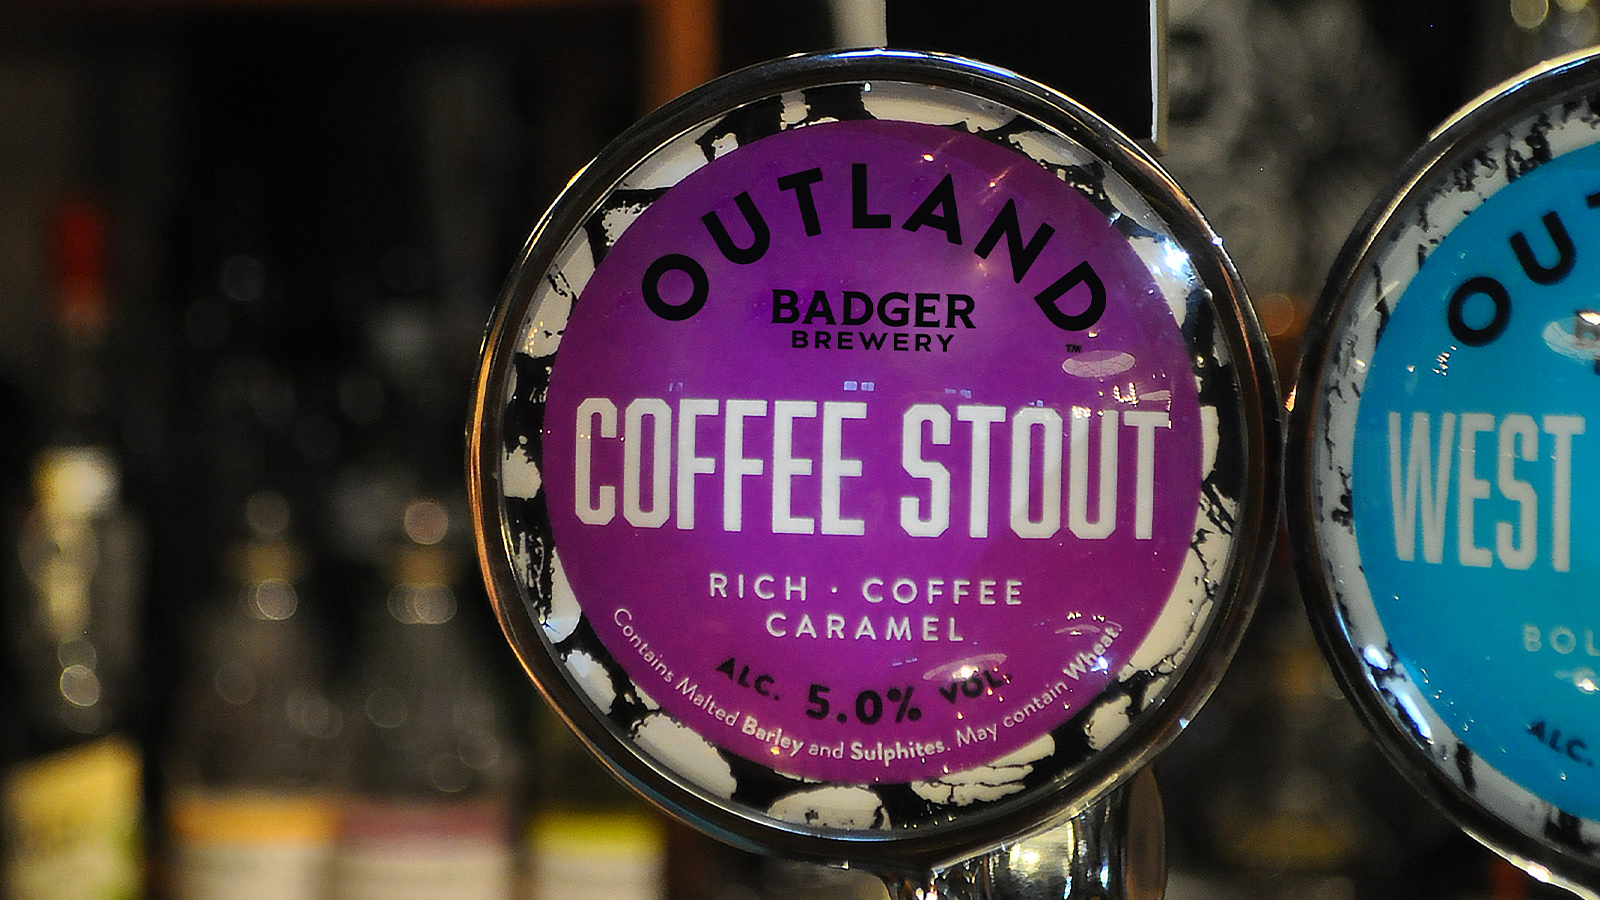 Where to find Outland Coffee Stout in Hall and Woodhouse pubs